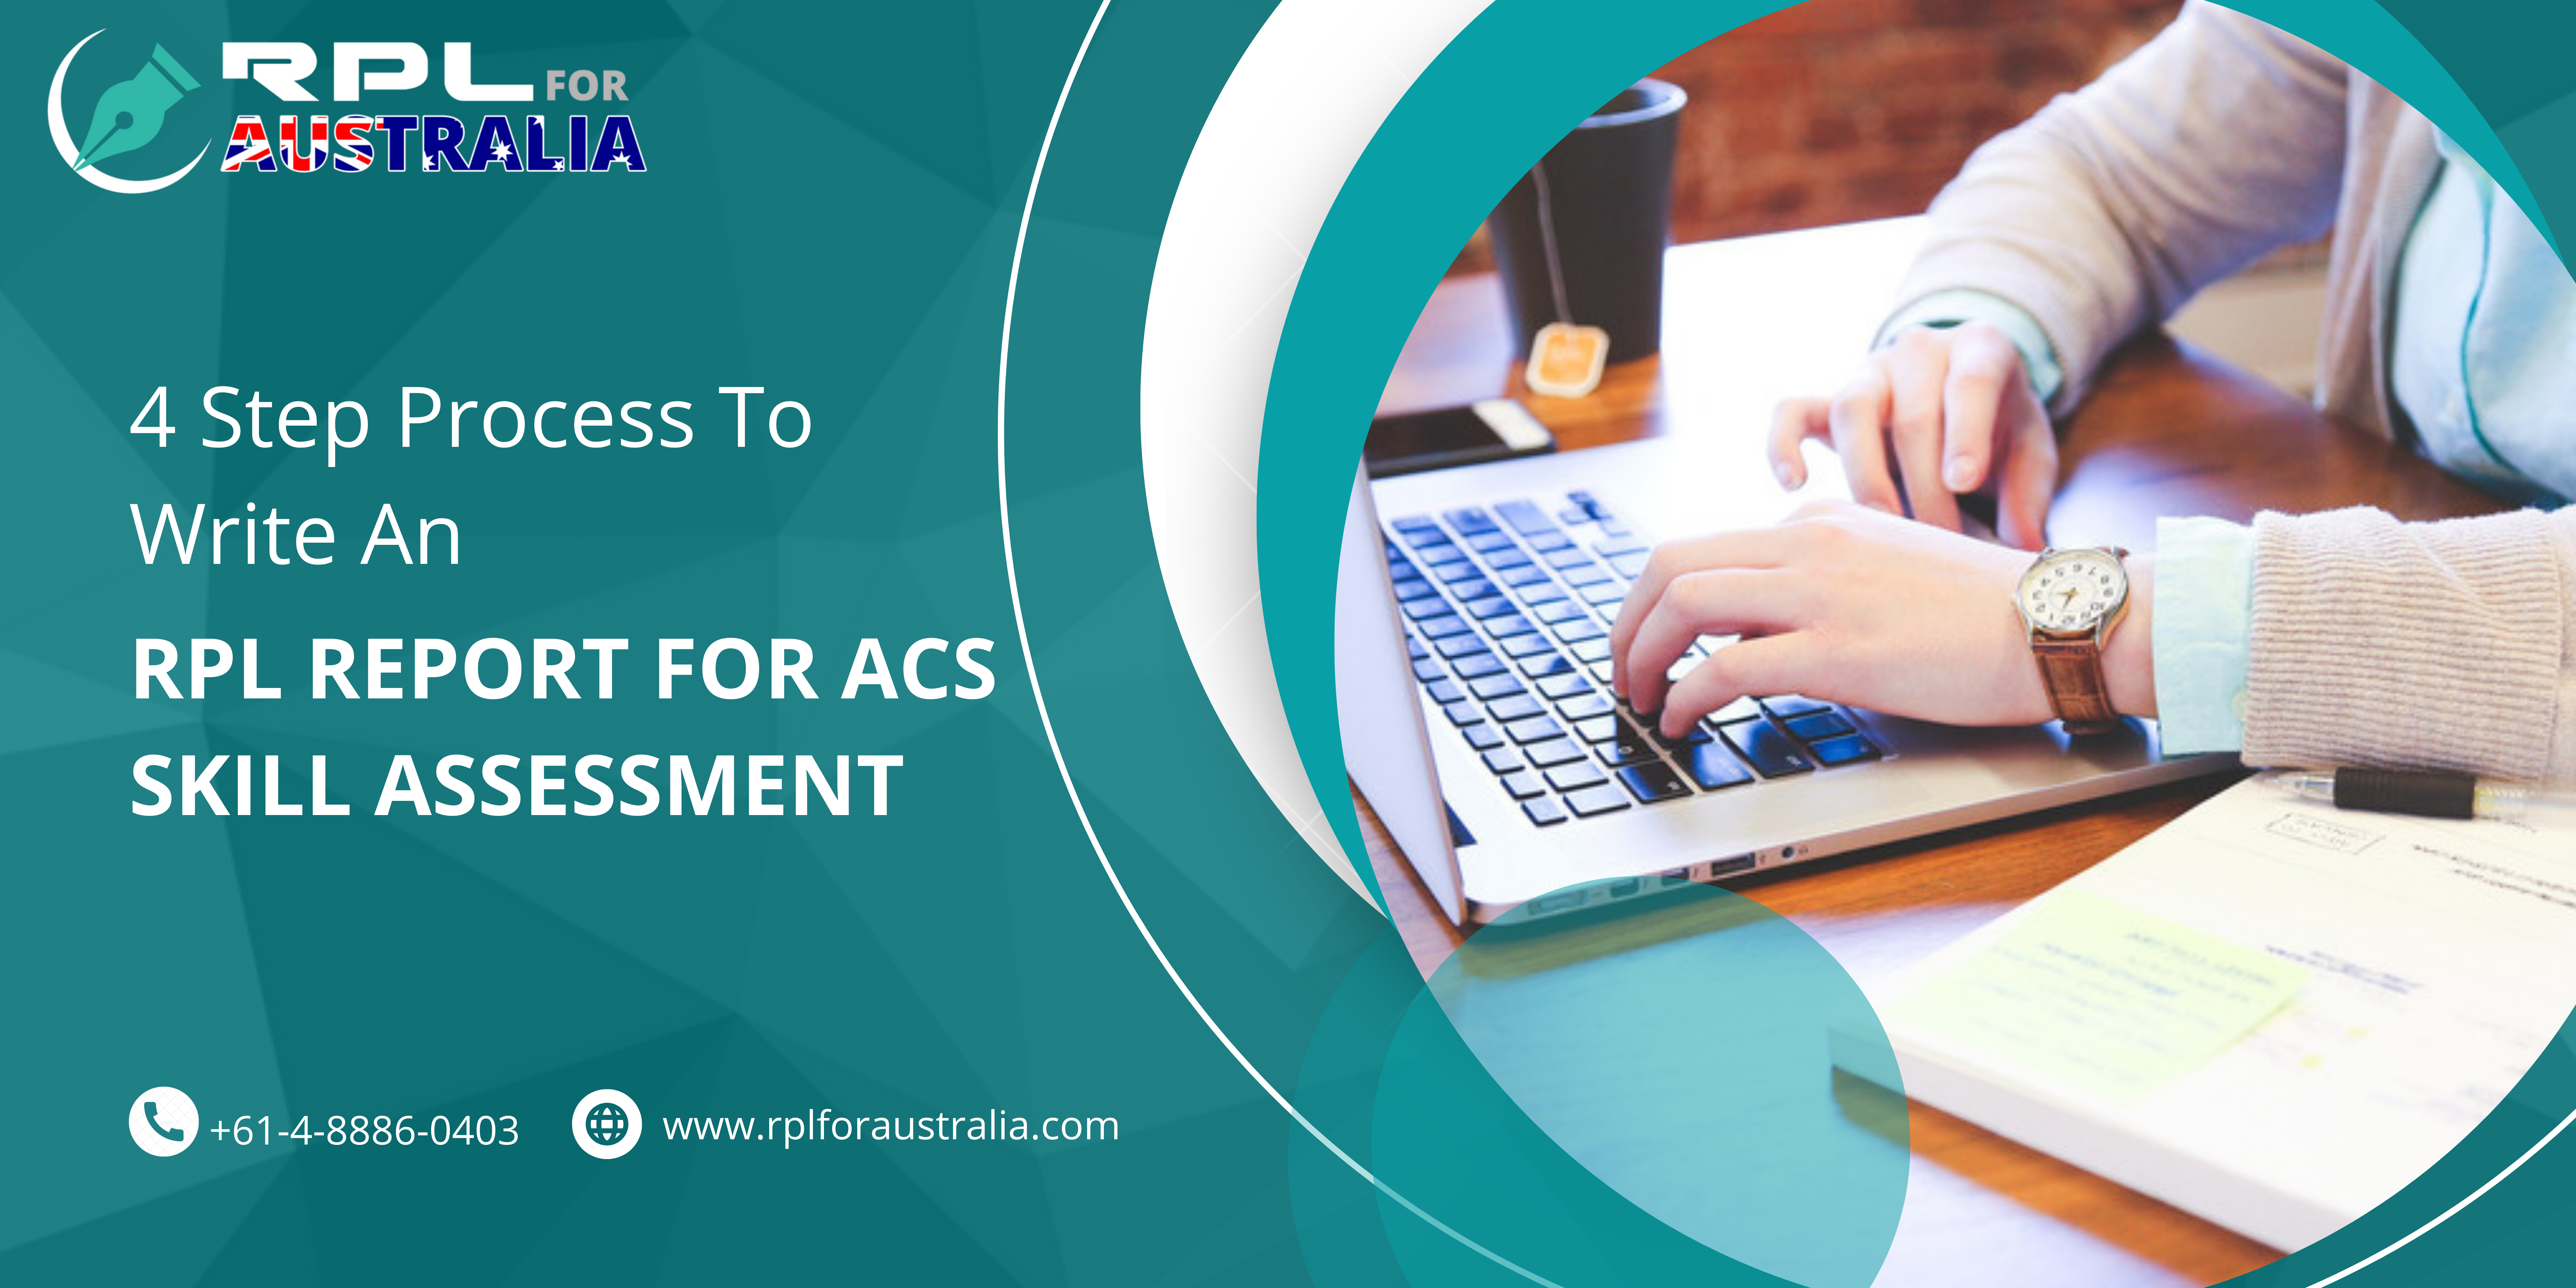 4 Step Process To Write An RPL Report For ACS Skill Assessment